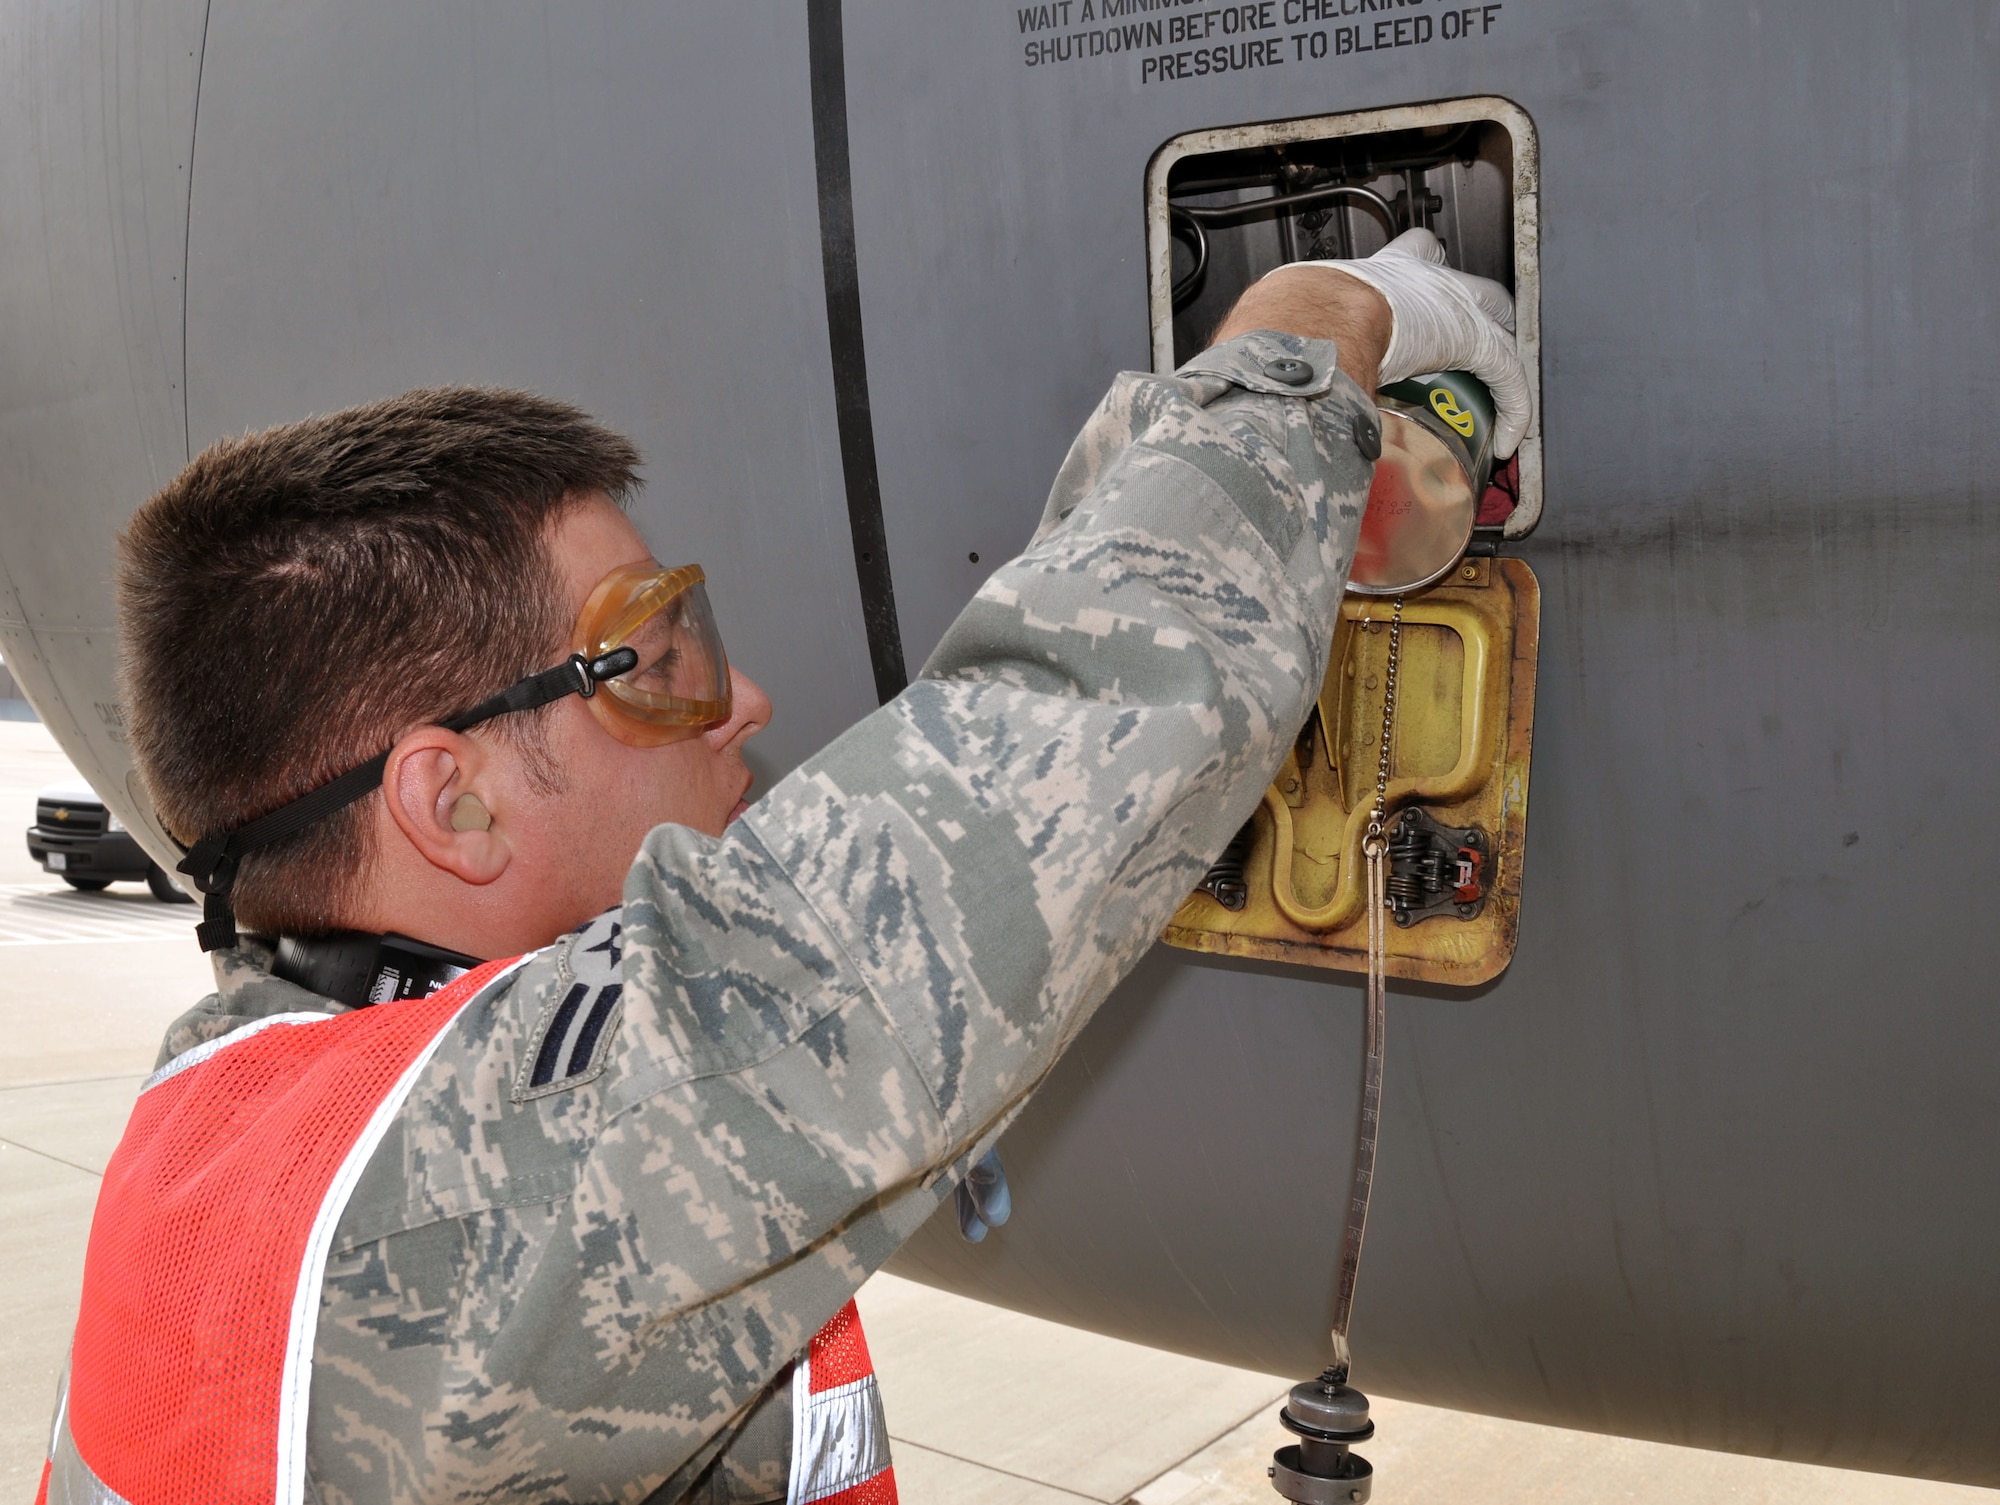 Airman 1st Class Patrick Monroe, a crew chief assigned to the Air Force Reserve 931st Aircraft Maintenance Squadron adds oil to one of the engines of a KC-135 Stratotanker on the flight line at McConnell Air Force Base, Kan., Oct. 22, 2012.  The aircraft had just returned from an overseas flight.  Along with numerous other tasks, maintainers check the oil in each of the four engines on the Stratotankers after every flight and service the oil levels whenever necessary.  The KC-135 provides the core aerial refueling capability for the U.S. Air Force, and has been performing in this role for more than 50 years. (U.S. Air Force photo by 1st Lt. Zach Anderson) 